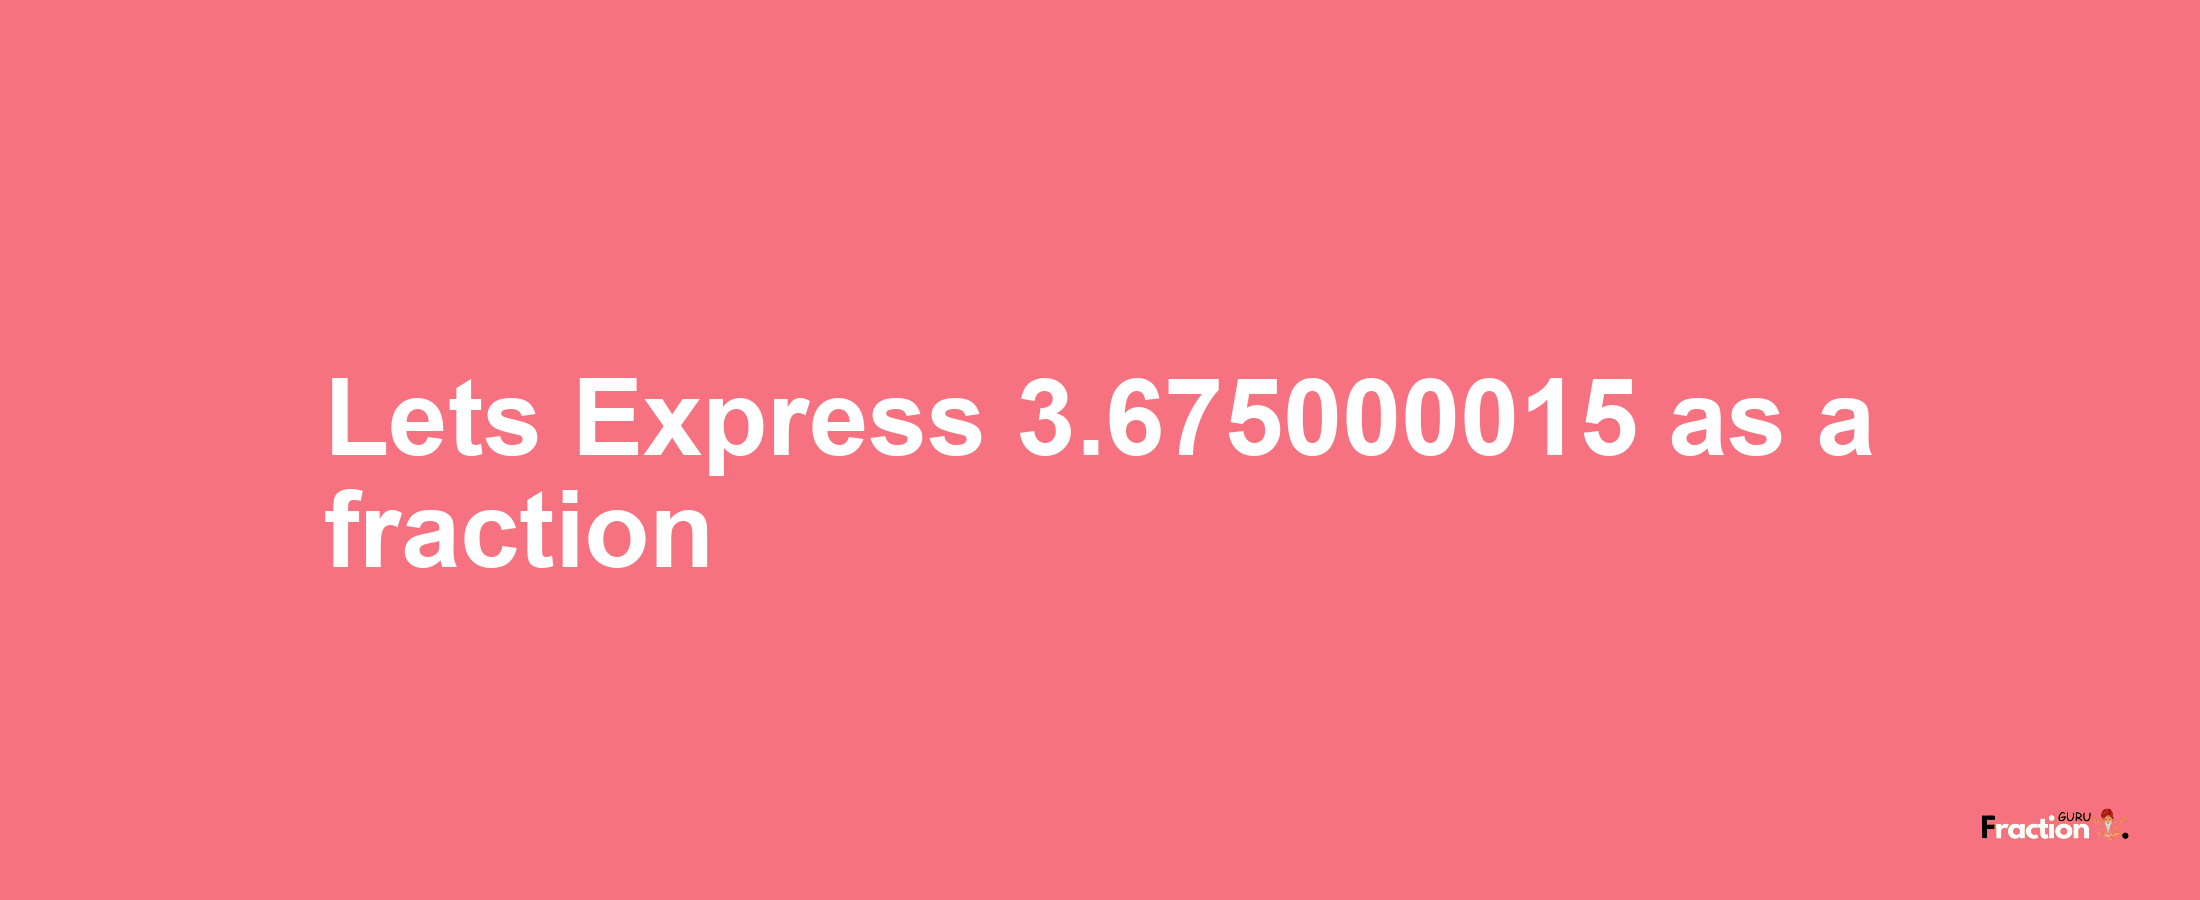 Lets Express 3.675000015 as afraction